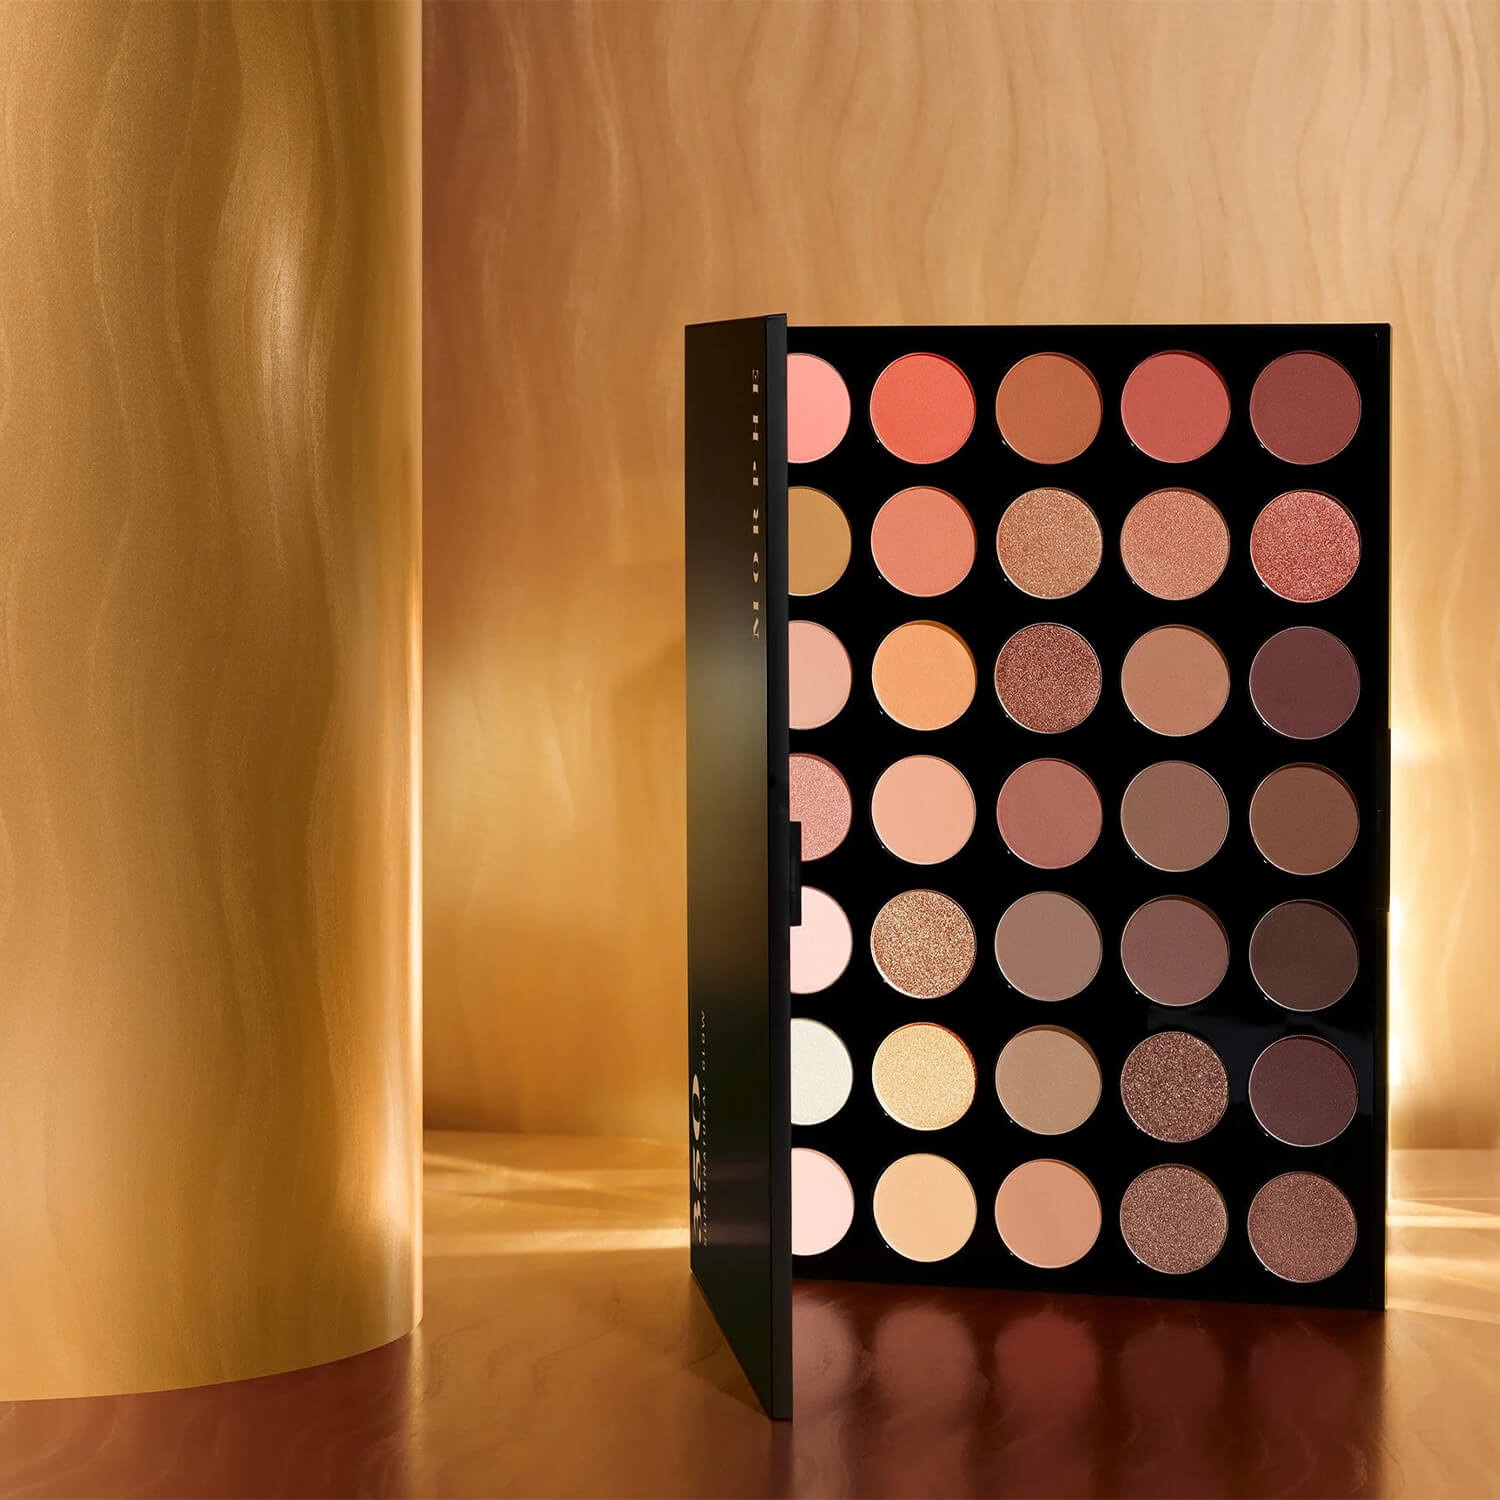 Shop 100% original Morphe 35O Supernatural Glow Artistry Palette available at Heygirl.pk for delivery in Pakistan. 